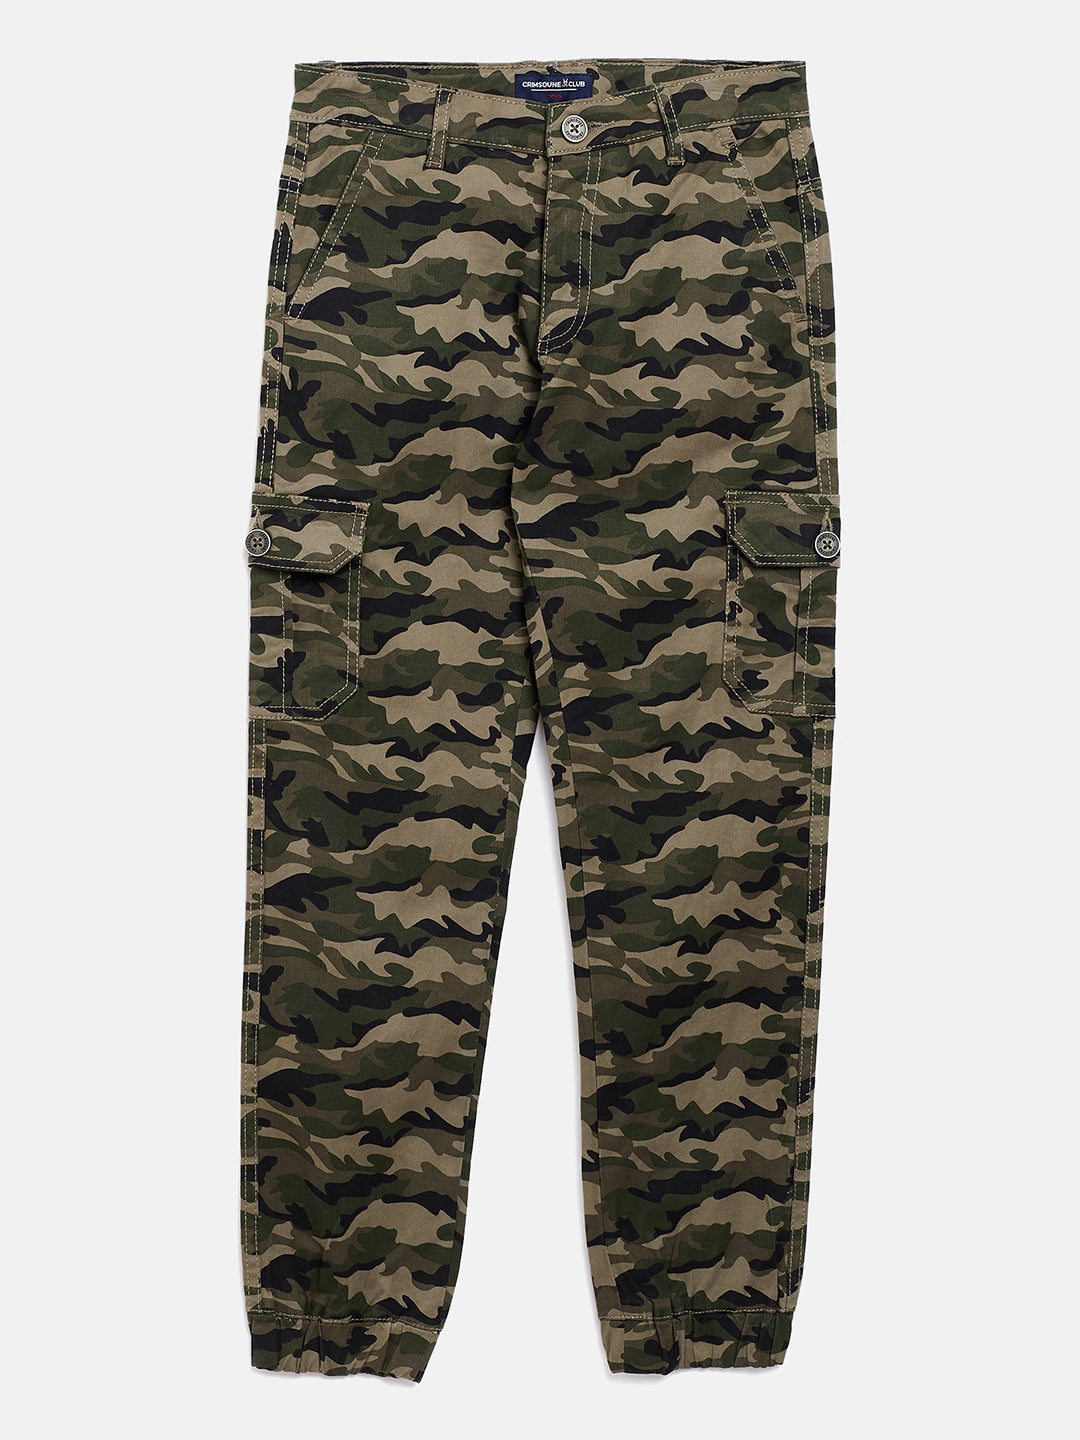 Olive Camouflage Trousers - Boys Trousers